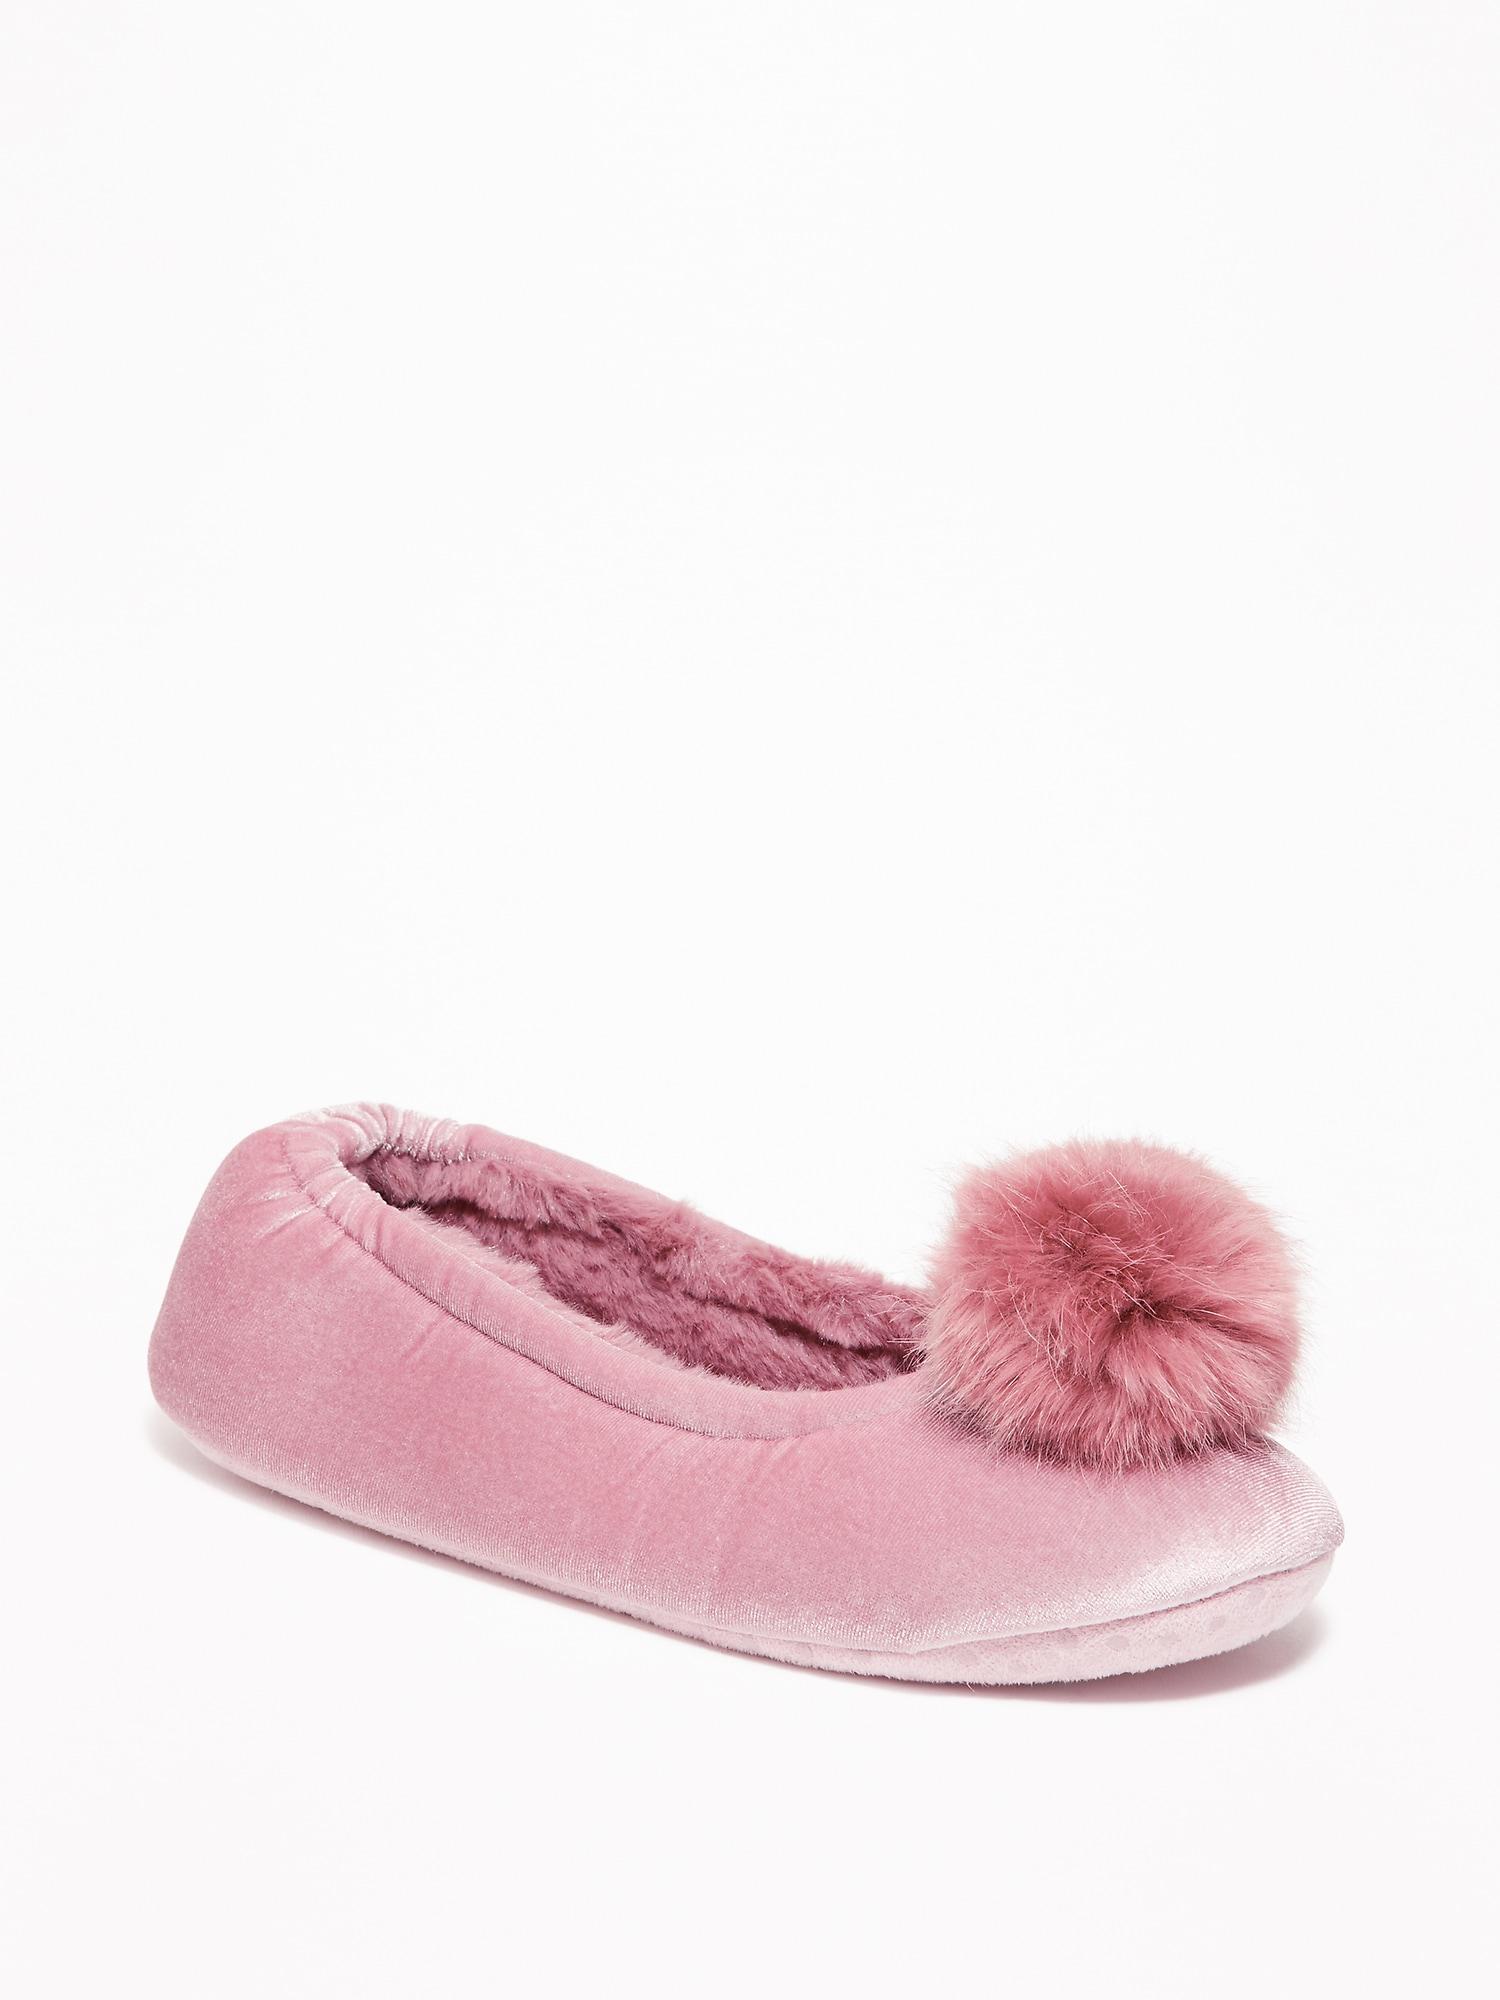 ugg slippers discount